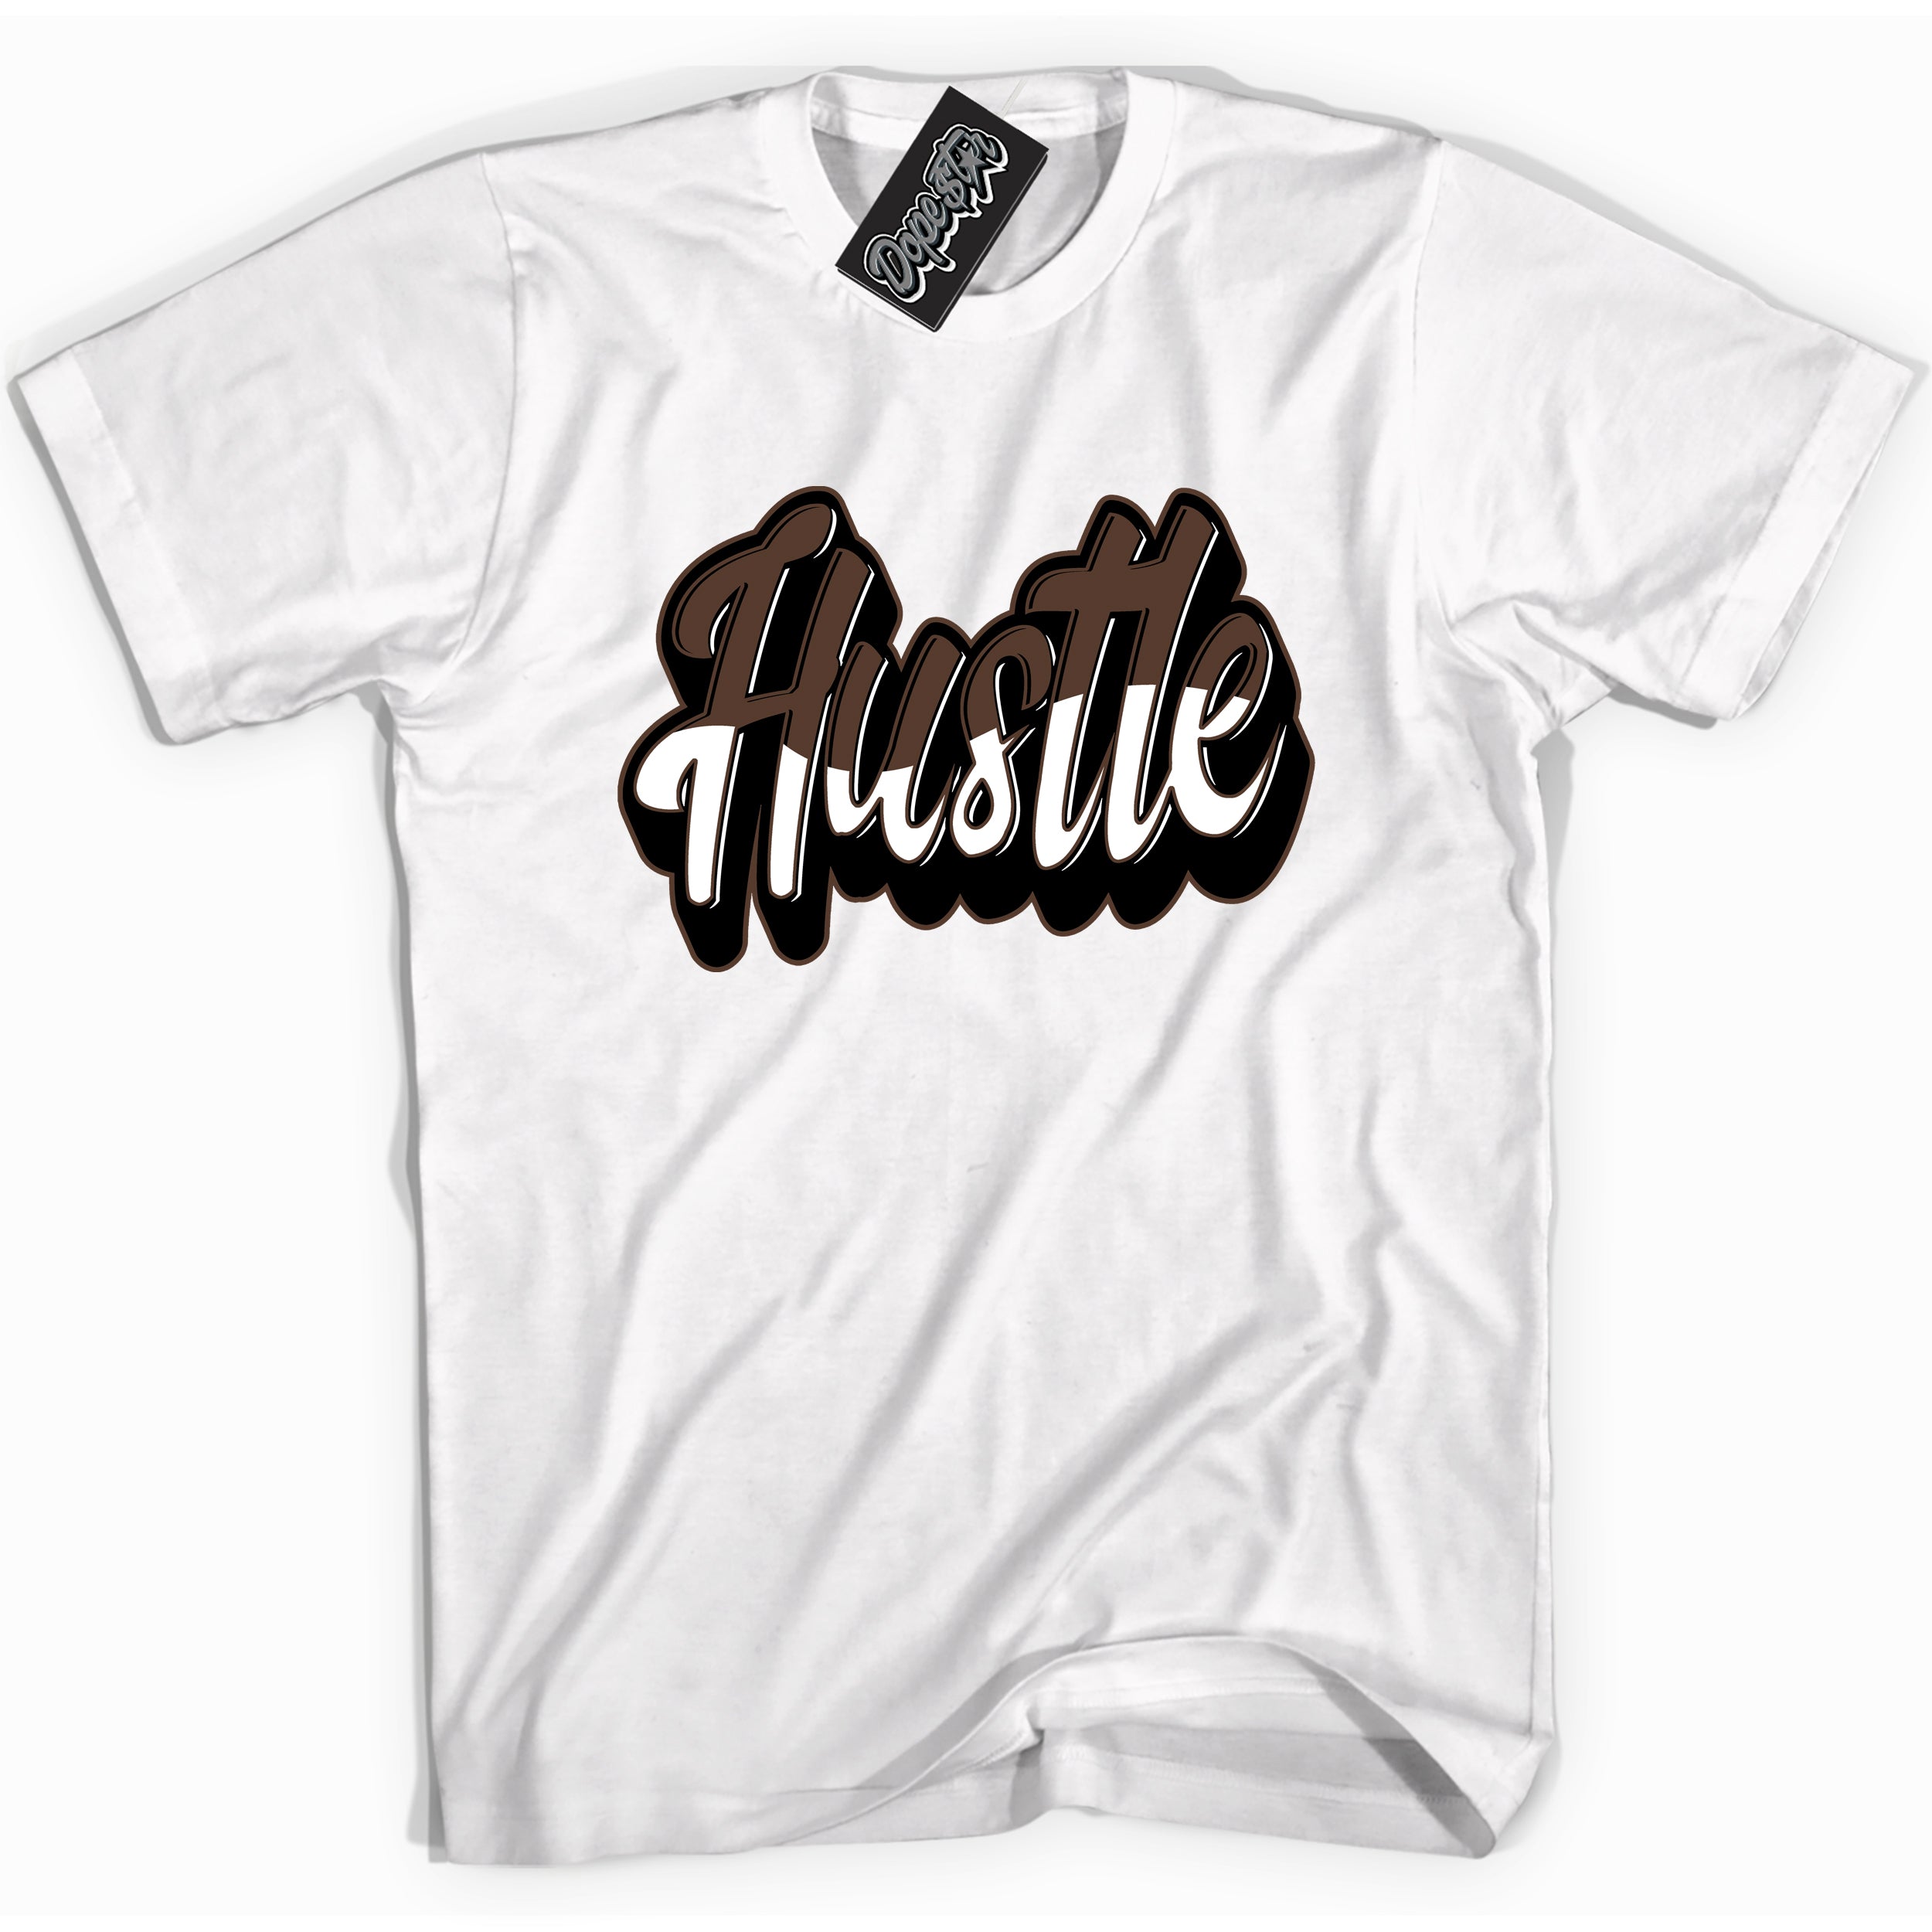 Cool White graphic tee with “ Hustle ” design, that perfectly matches Palomino 1s sneakers 